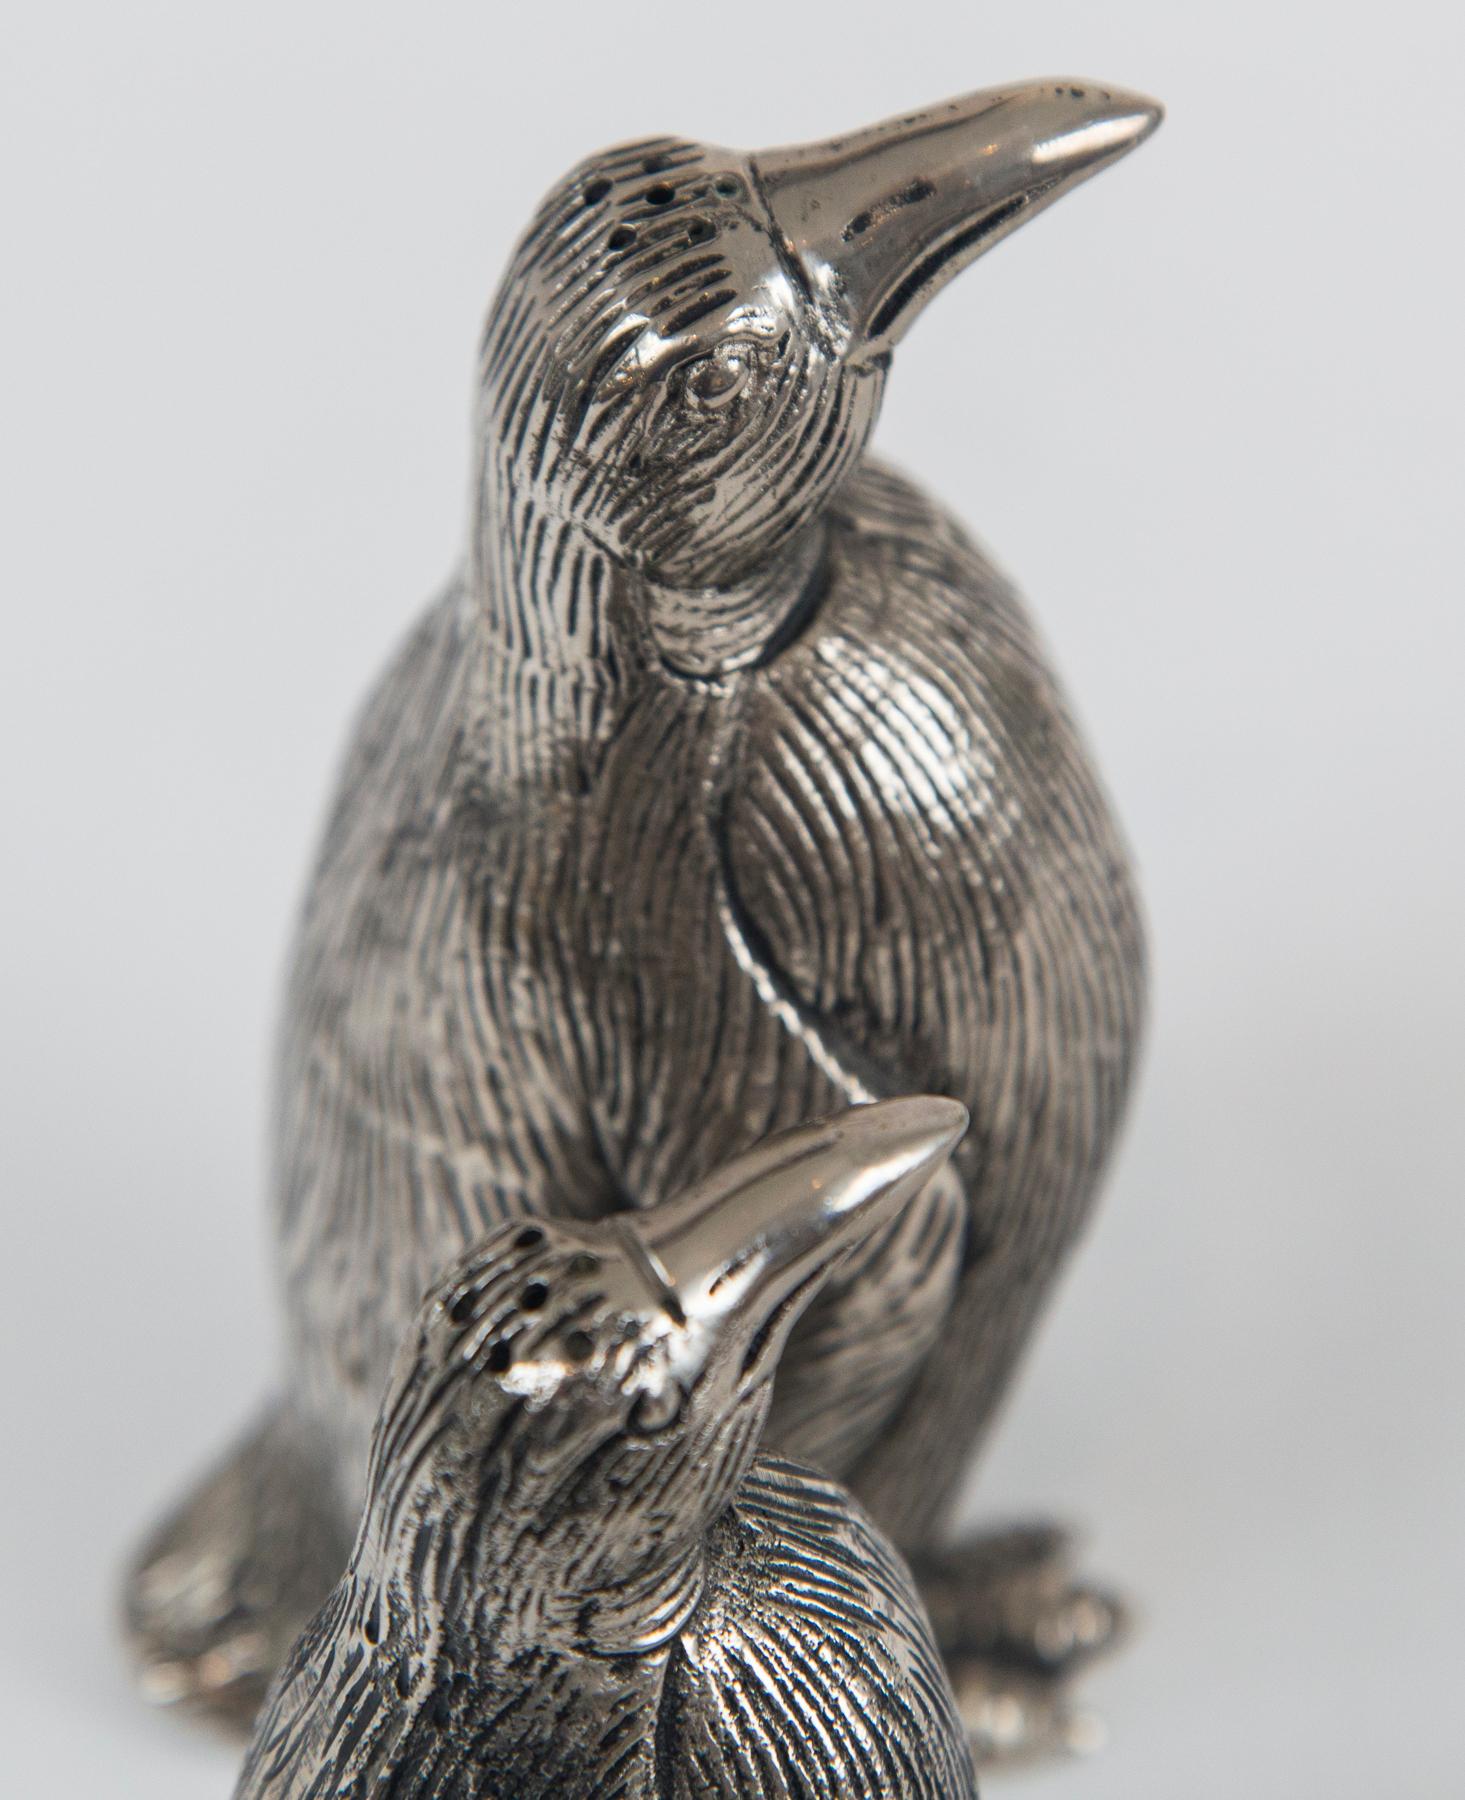 Mid-Century Modern Gucci Penguin Salt and Pepper Shakers, Silver Plate Over Pewter